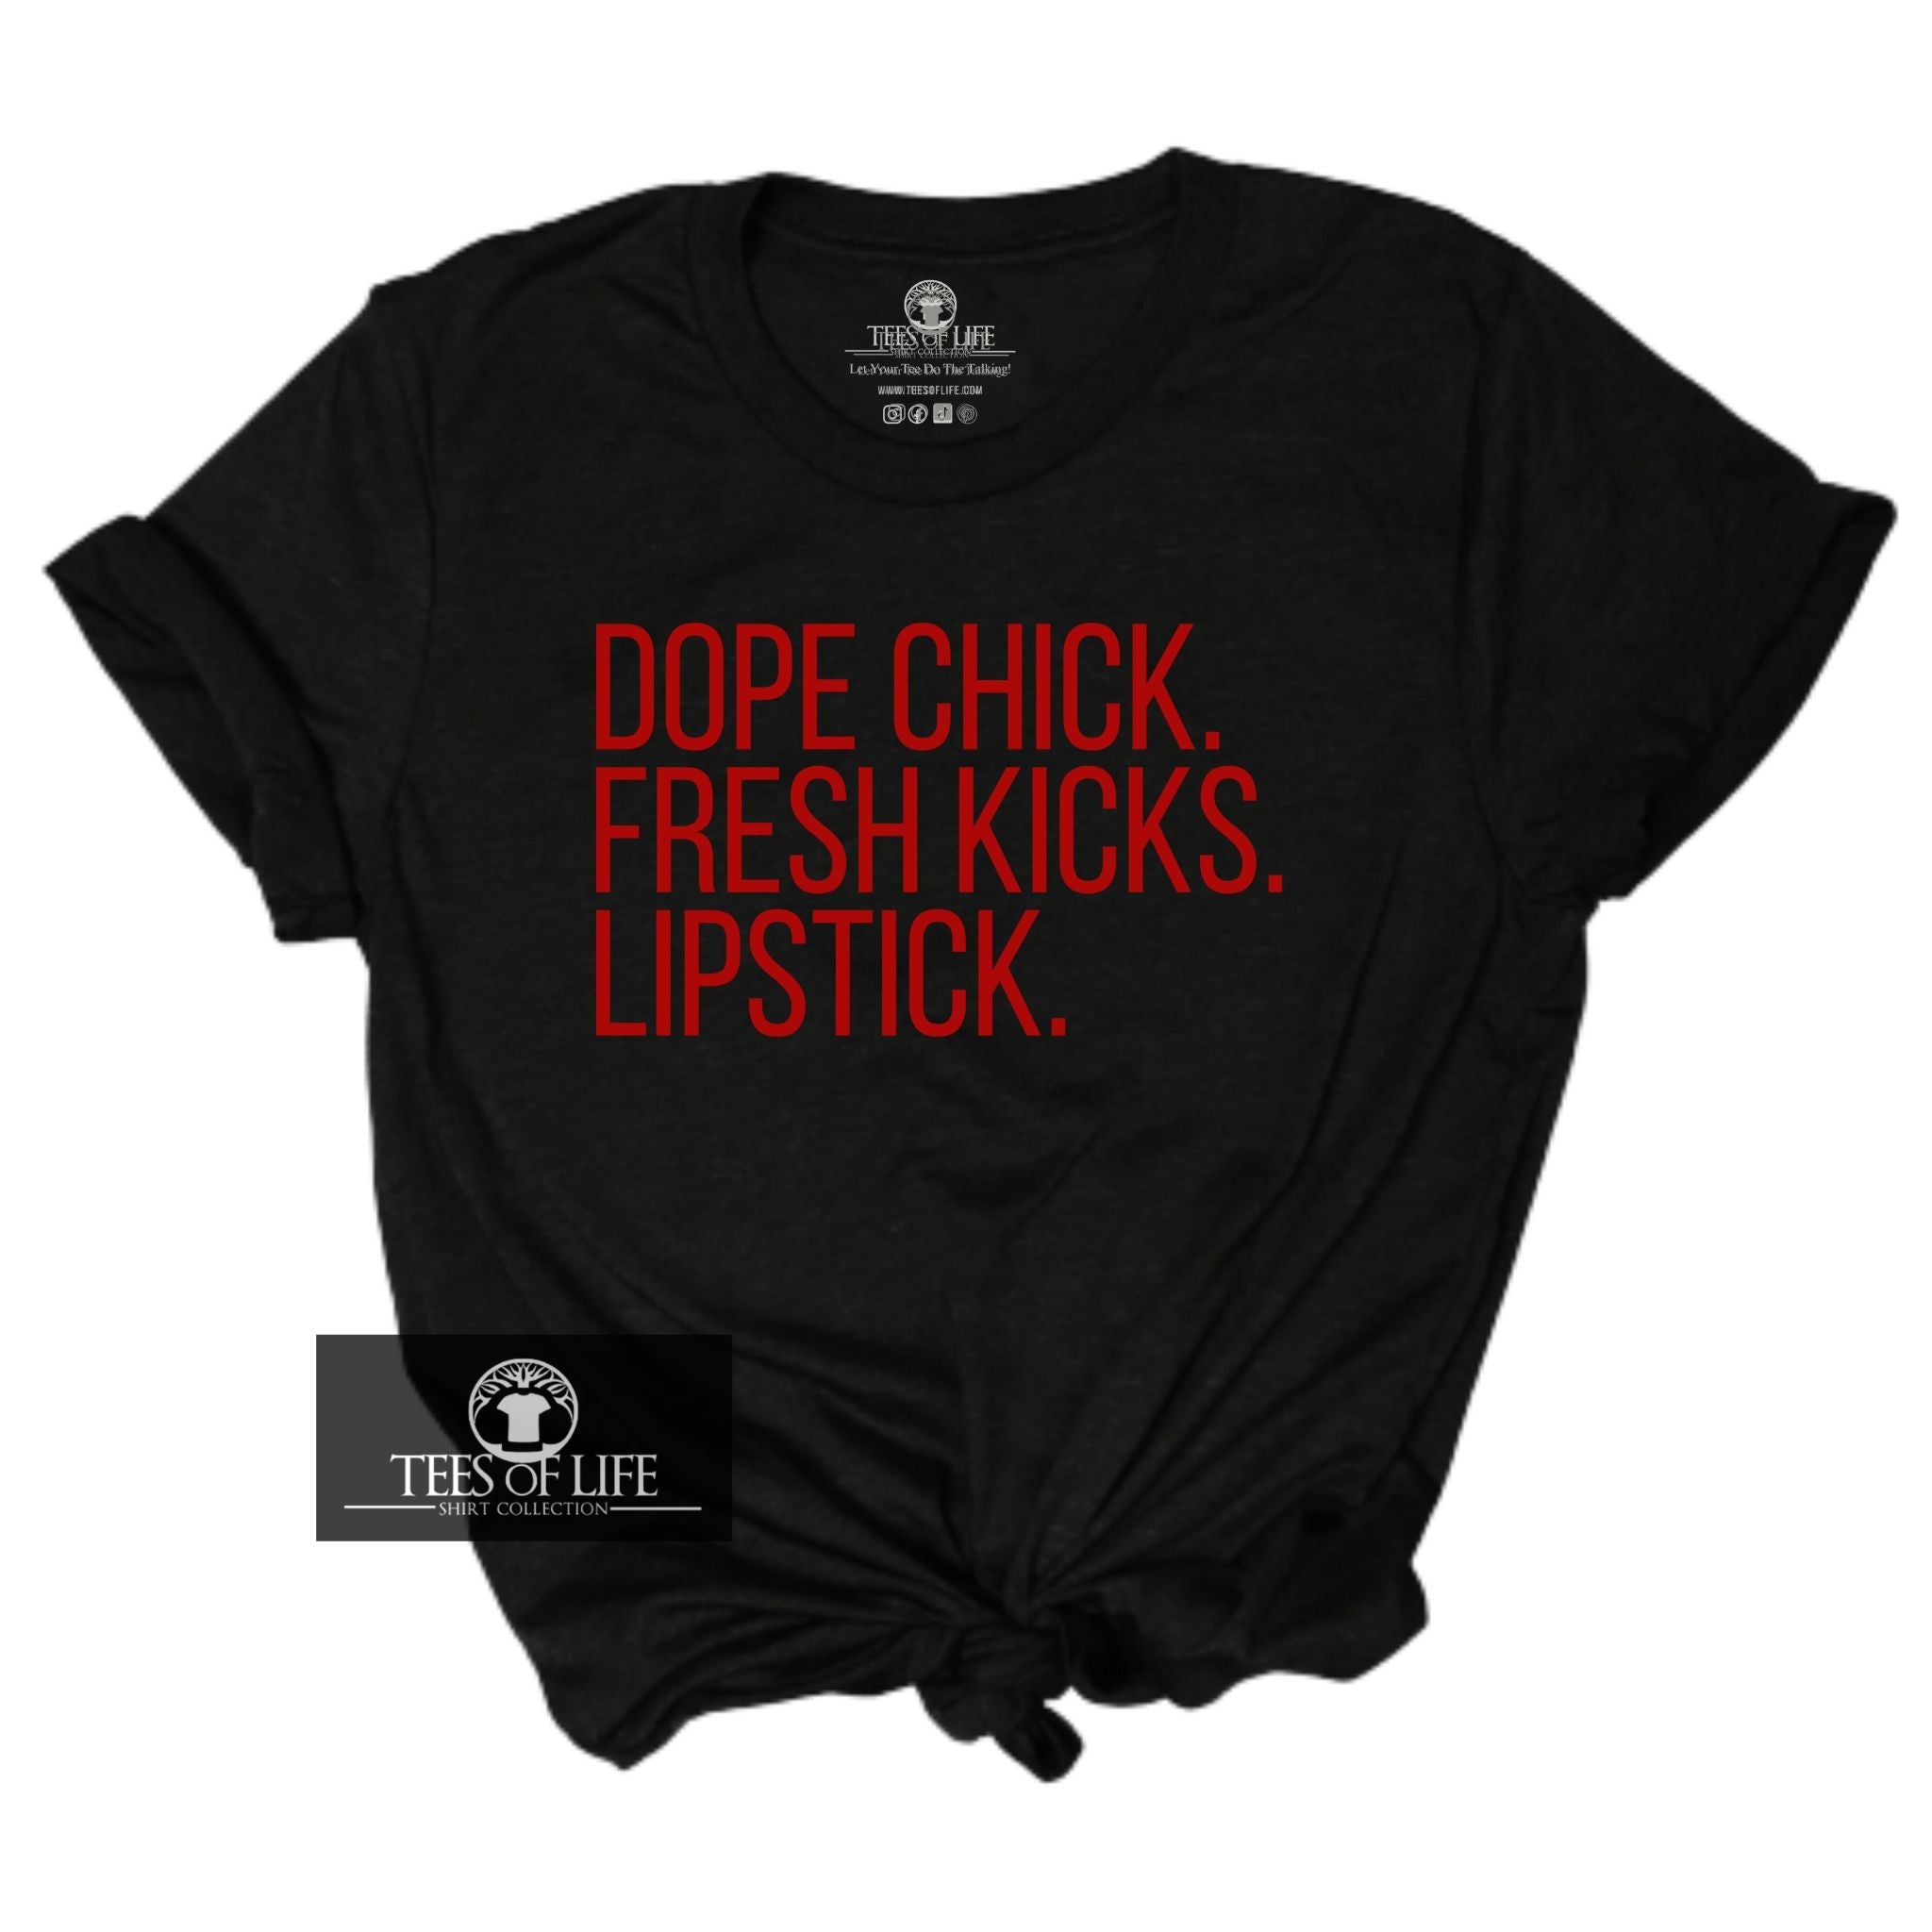 Dope Chick Fresh Kicks Lipstick Tee (Red Letters)